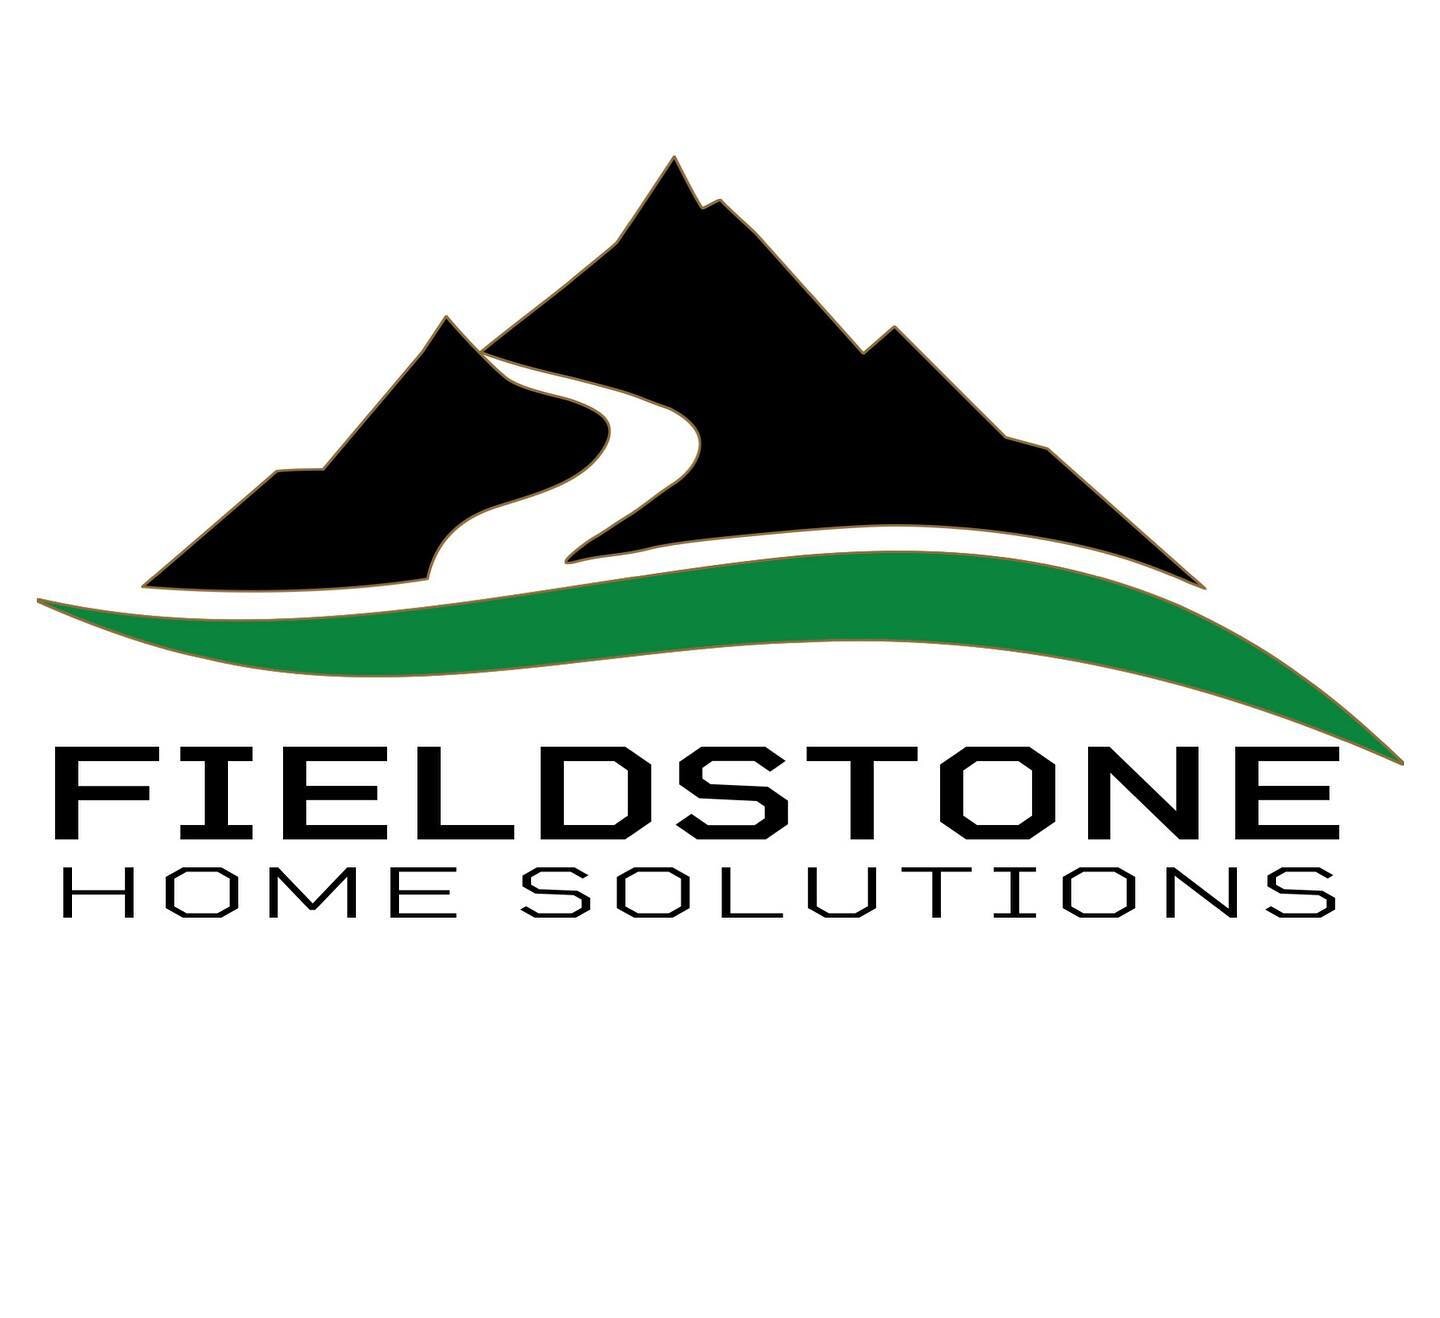 Fieldstone Home Solutions
 
Services
- Cabinet Handles &amp; Knobs
- Carpet Removal
- Ceiling Fan Replacement
- Disposal Replacement
- Door Knob &amp; Lock Replacement
- Drain Cleaning
- Dryer Vent Cleaning
- Drywall Repair
- Electrical Outlet &amp; 